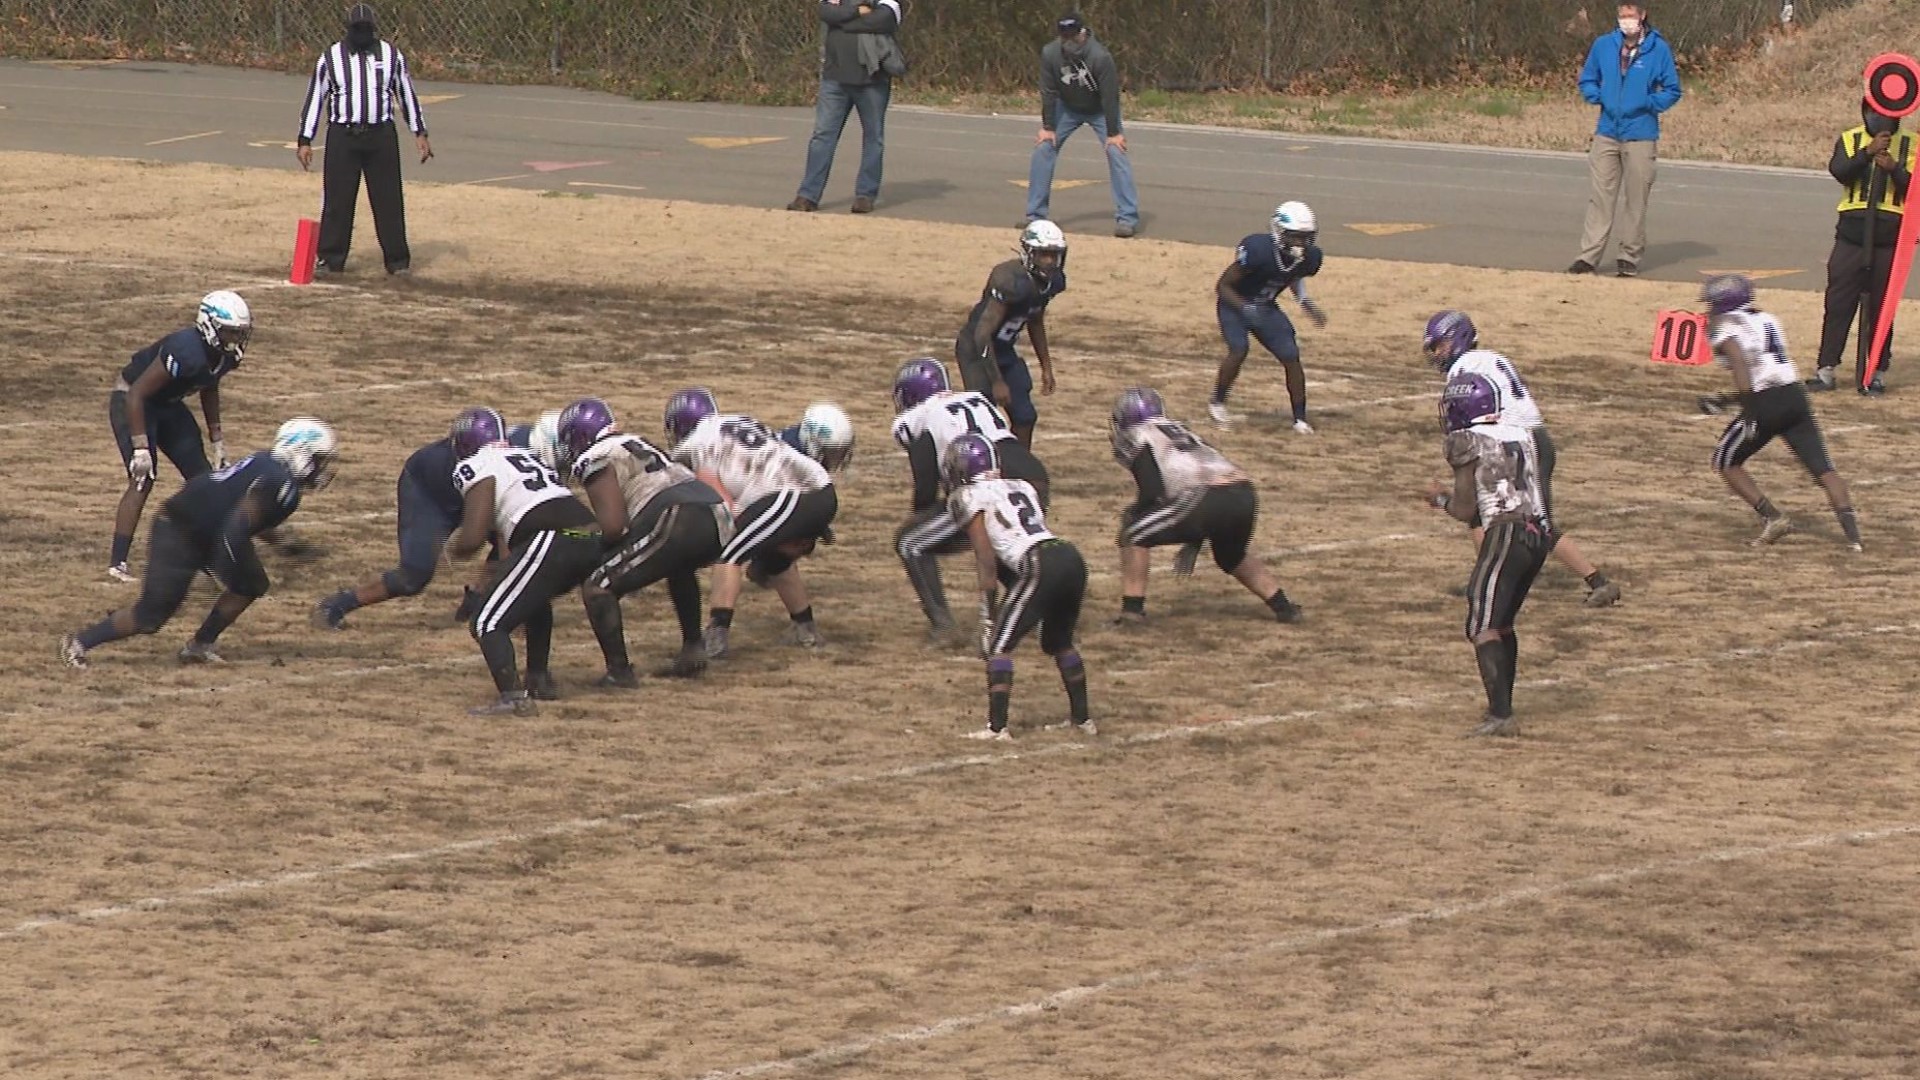 Deep Creek rallied from a 10-6 deficit to win over Indian River 21-17 on Saturday.